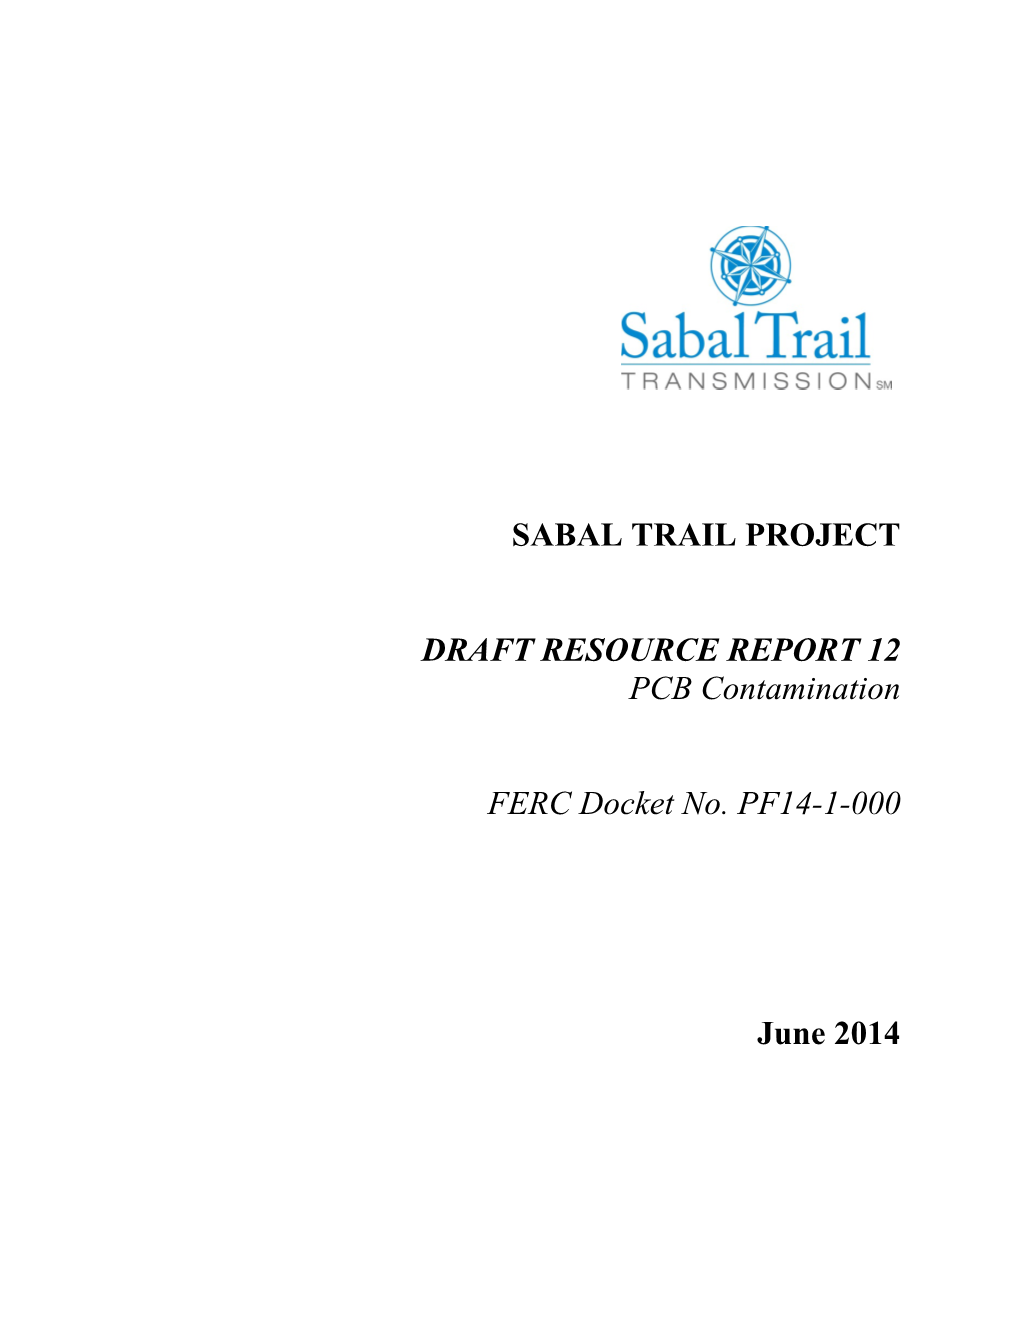 Sabal Trail Project Draft Resource Report 12 Pcb